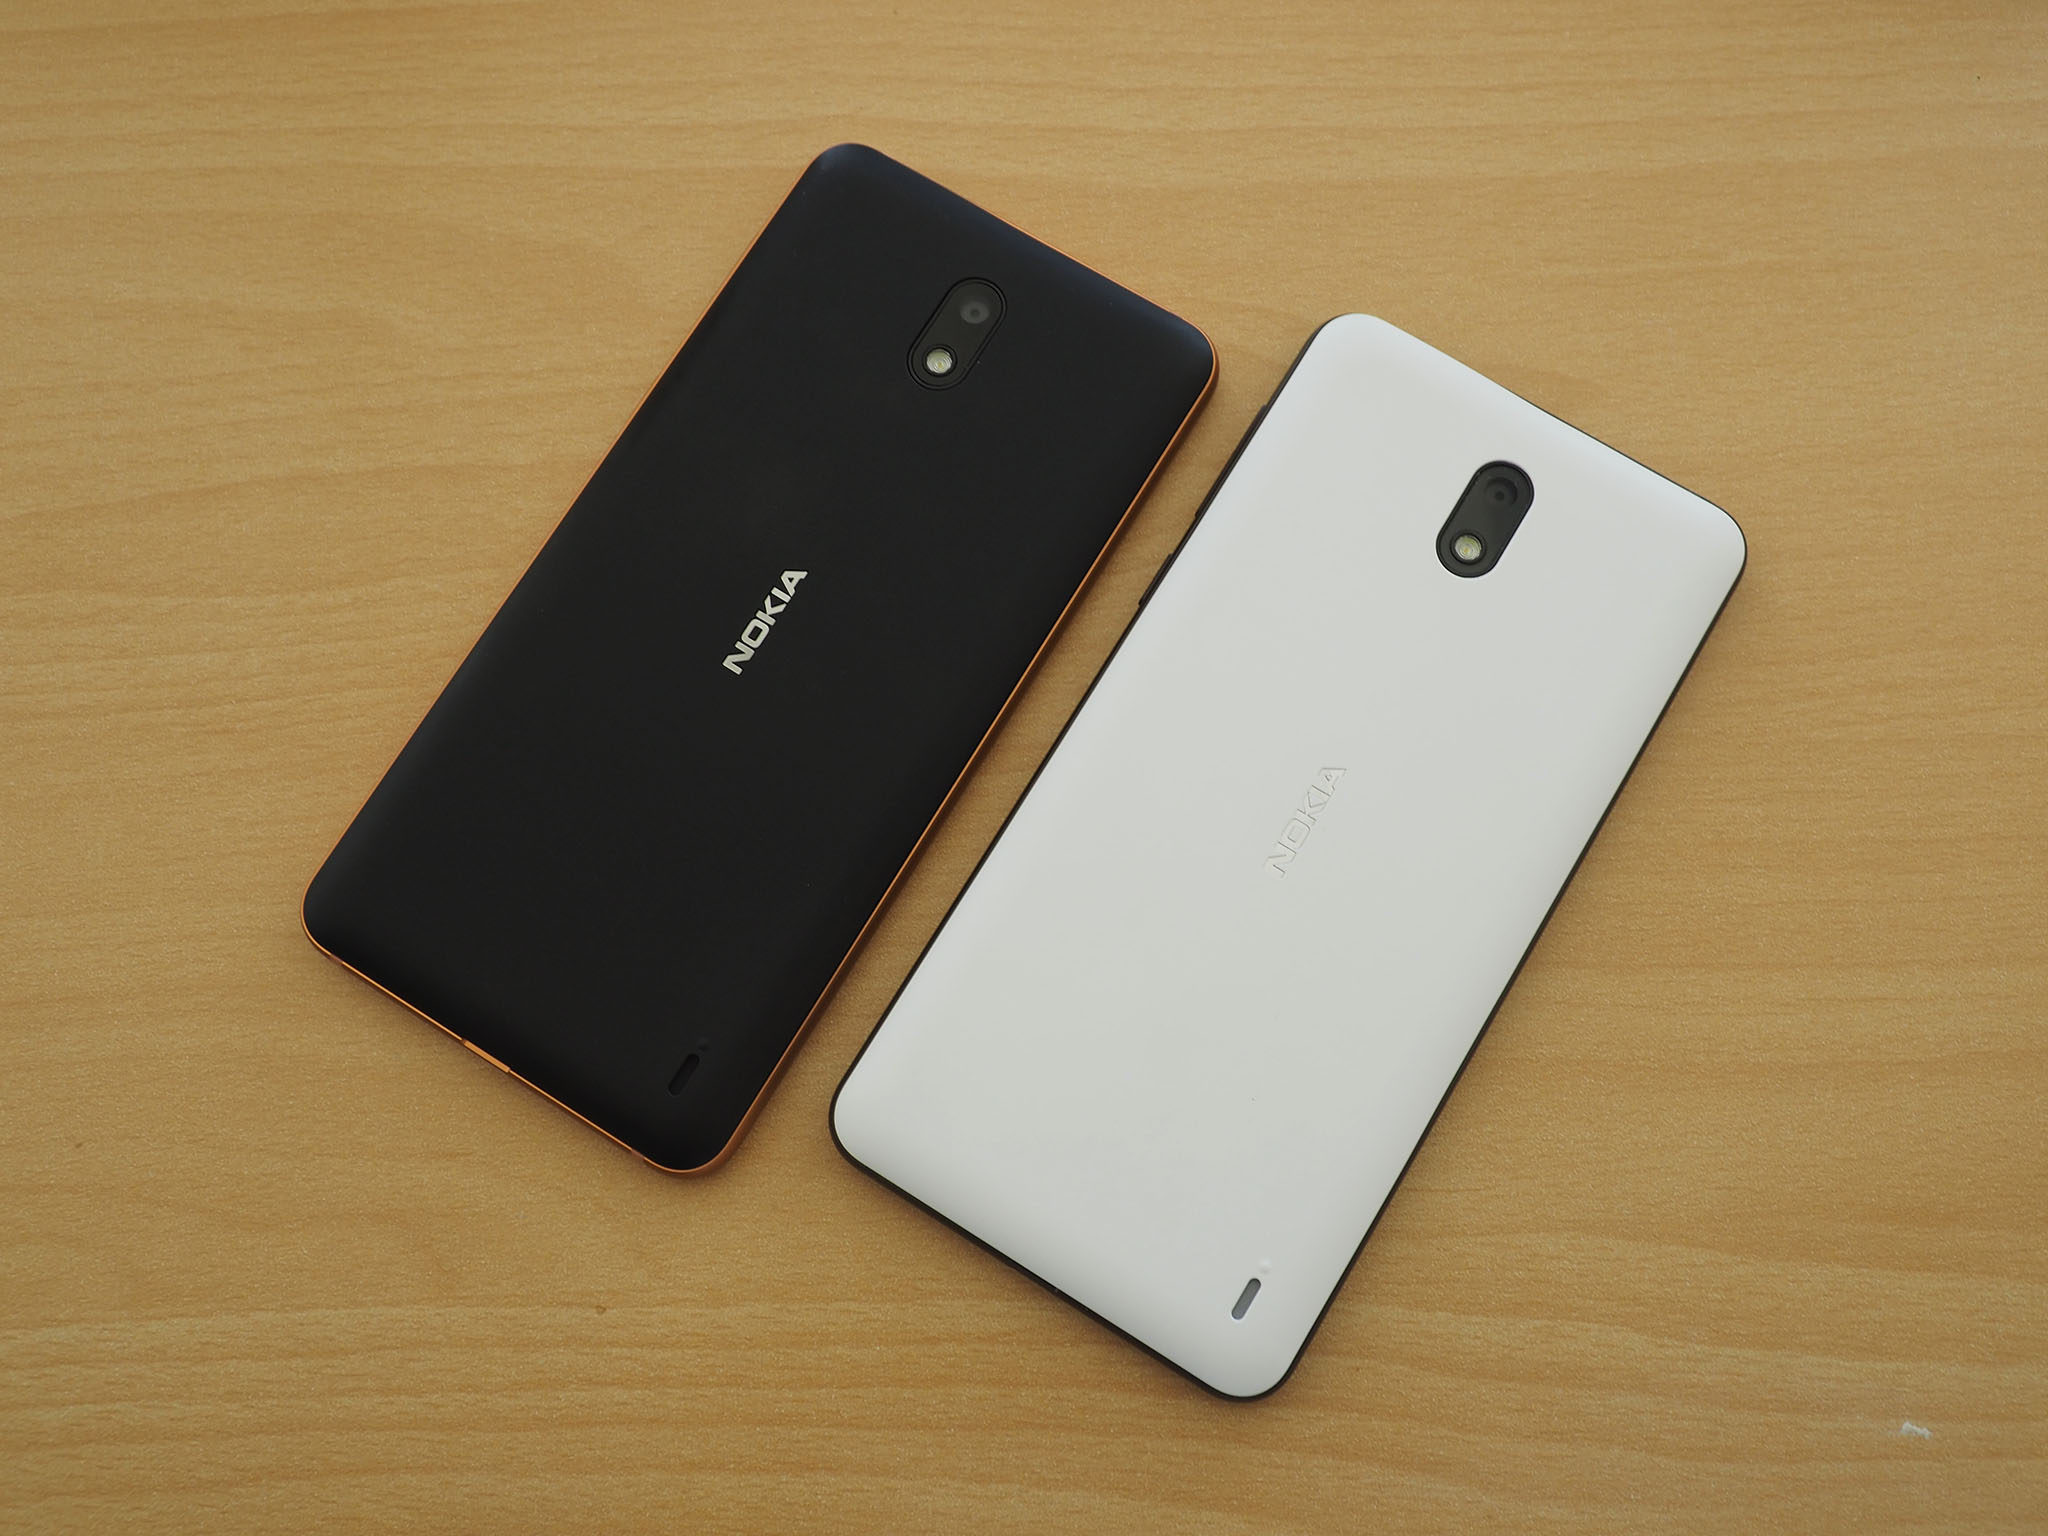 The $99 Nokia 2 will receive Android 8.1 update with Android Go tweaks